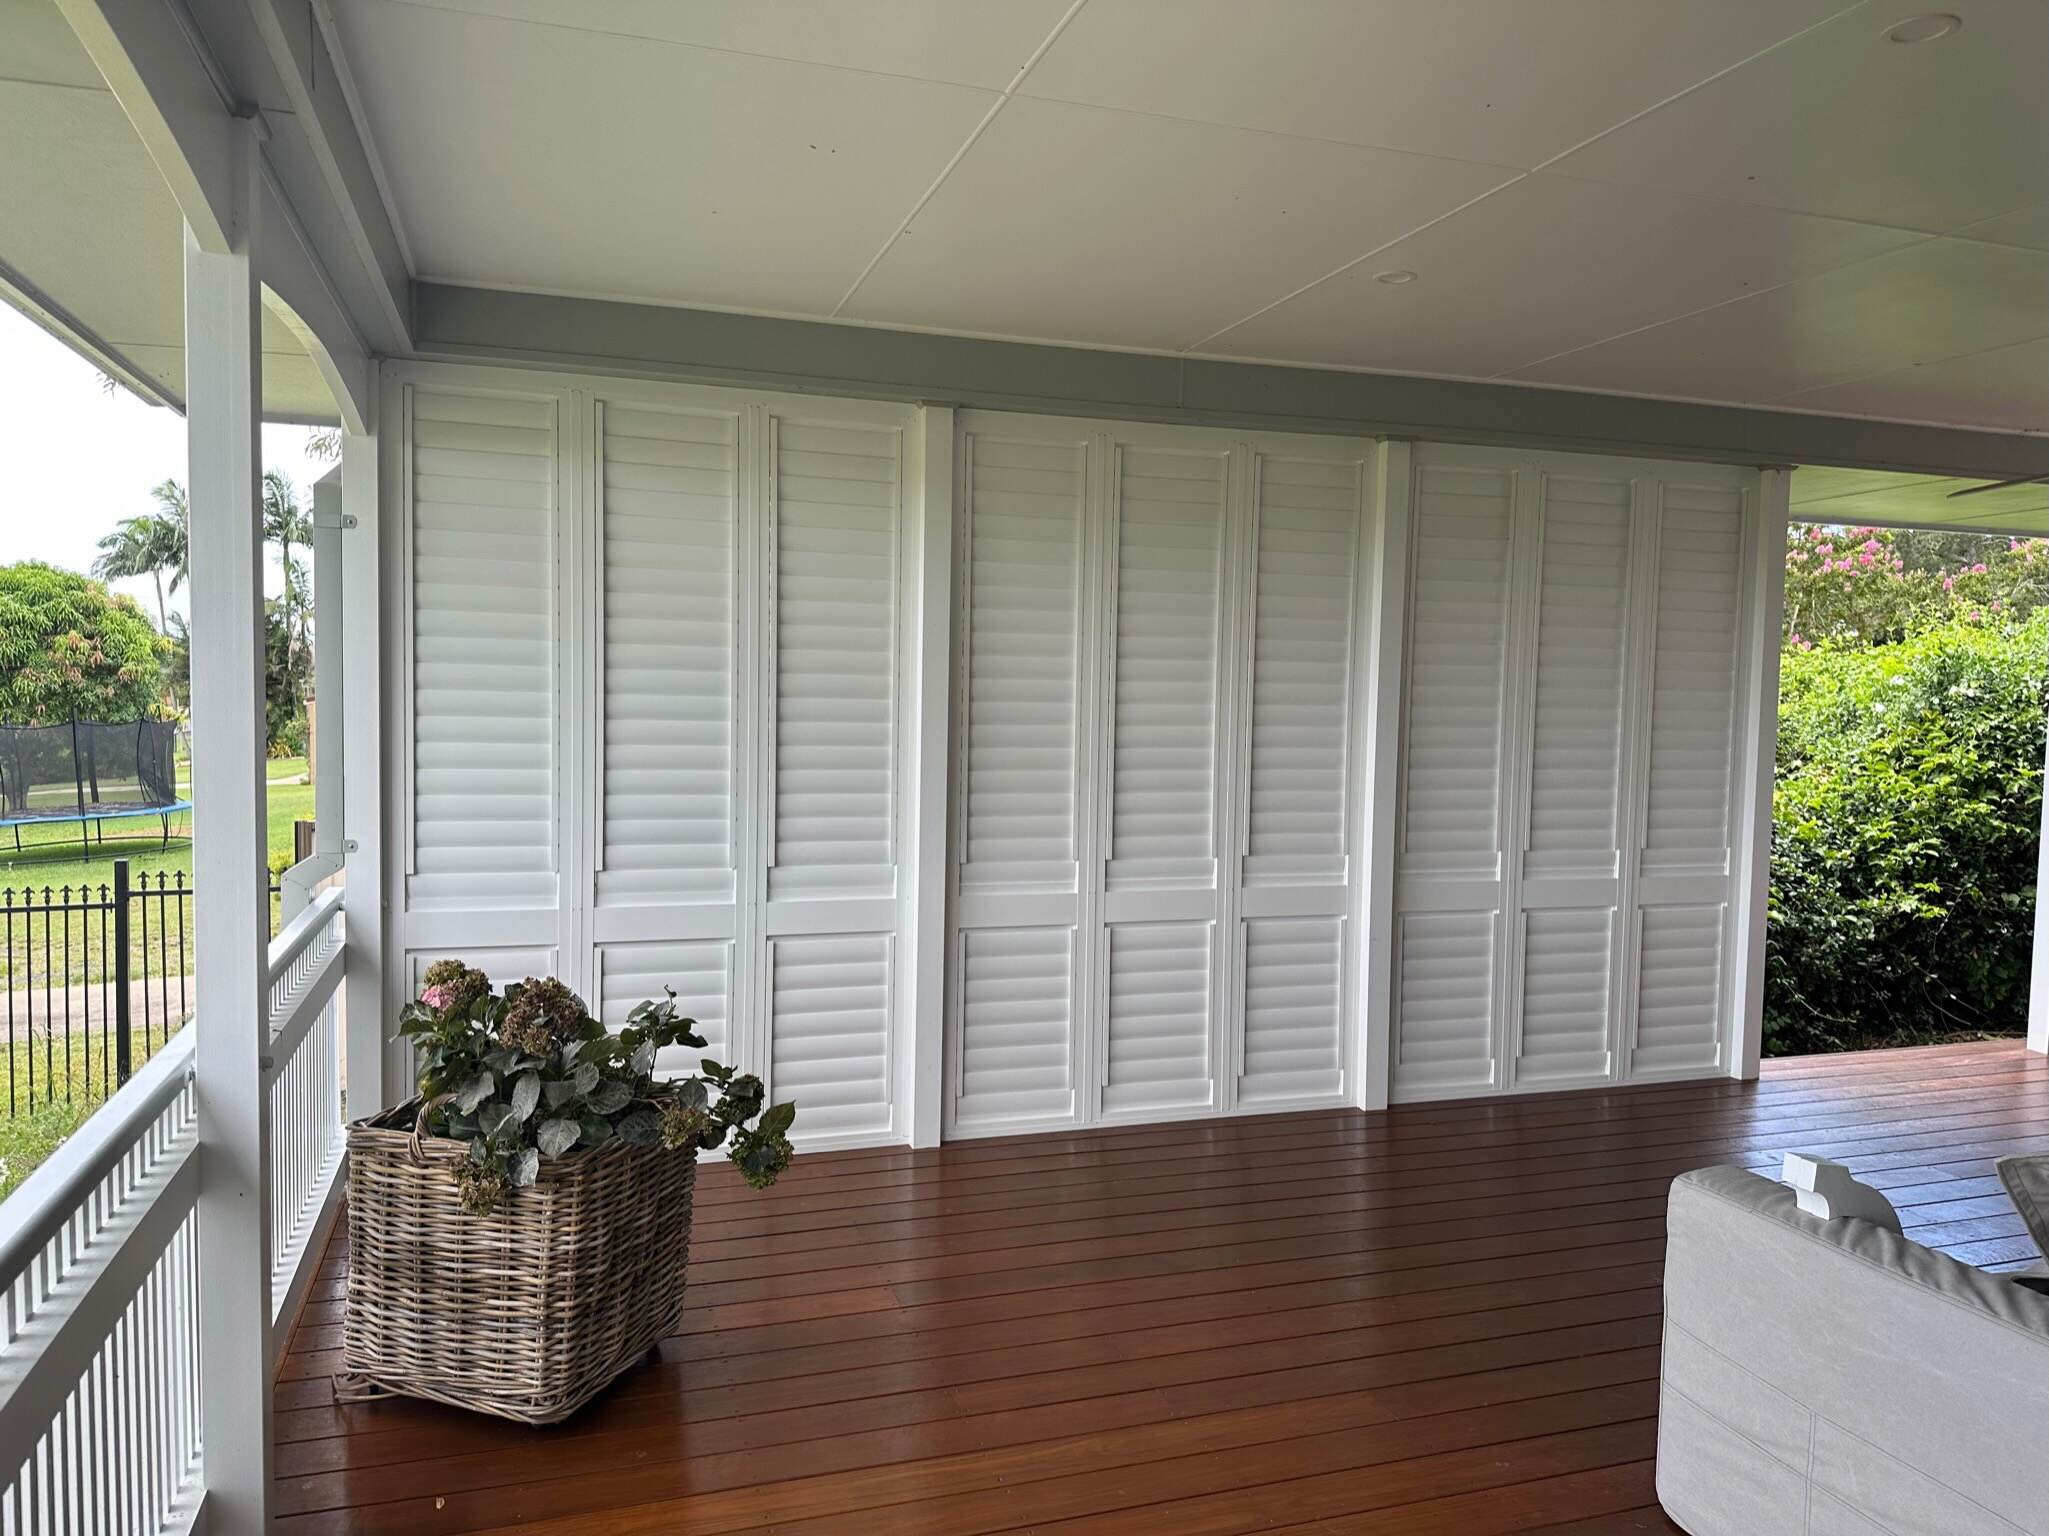 Floor Unit with Wide Windows — Timber Tec Shutters In Ballina, NSW